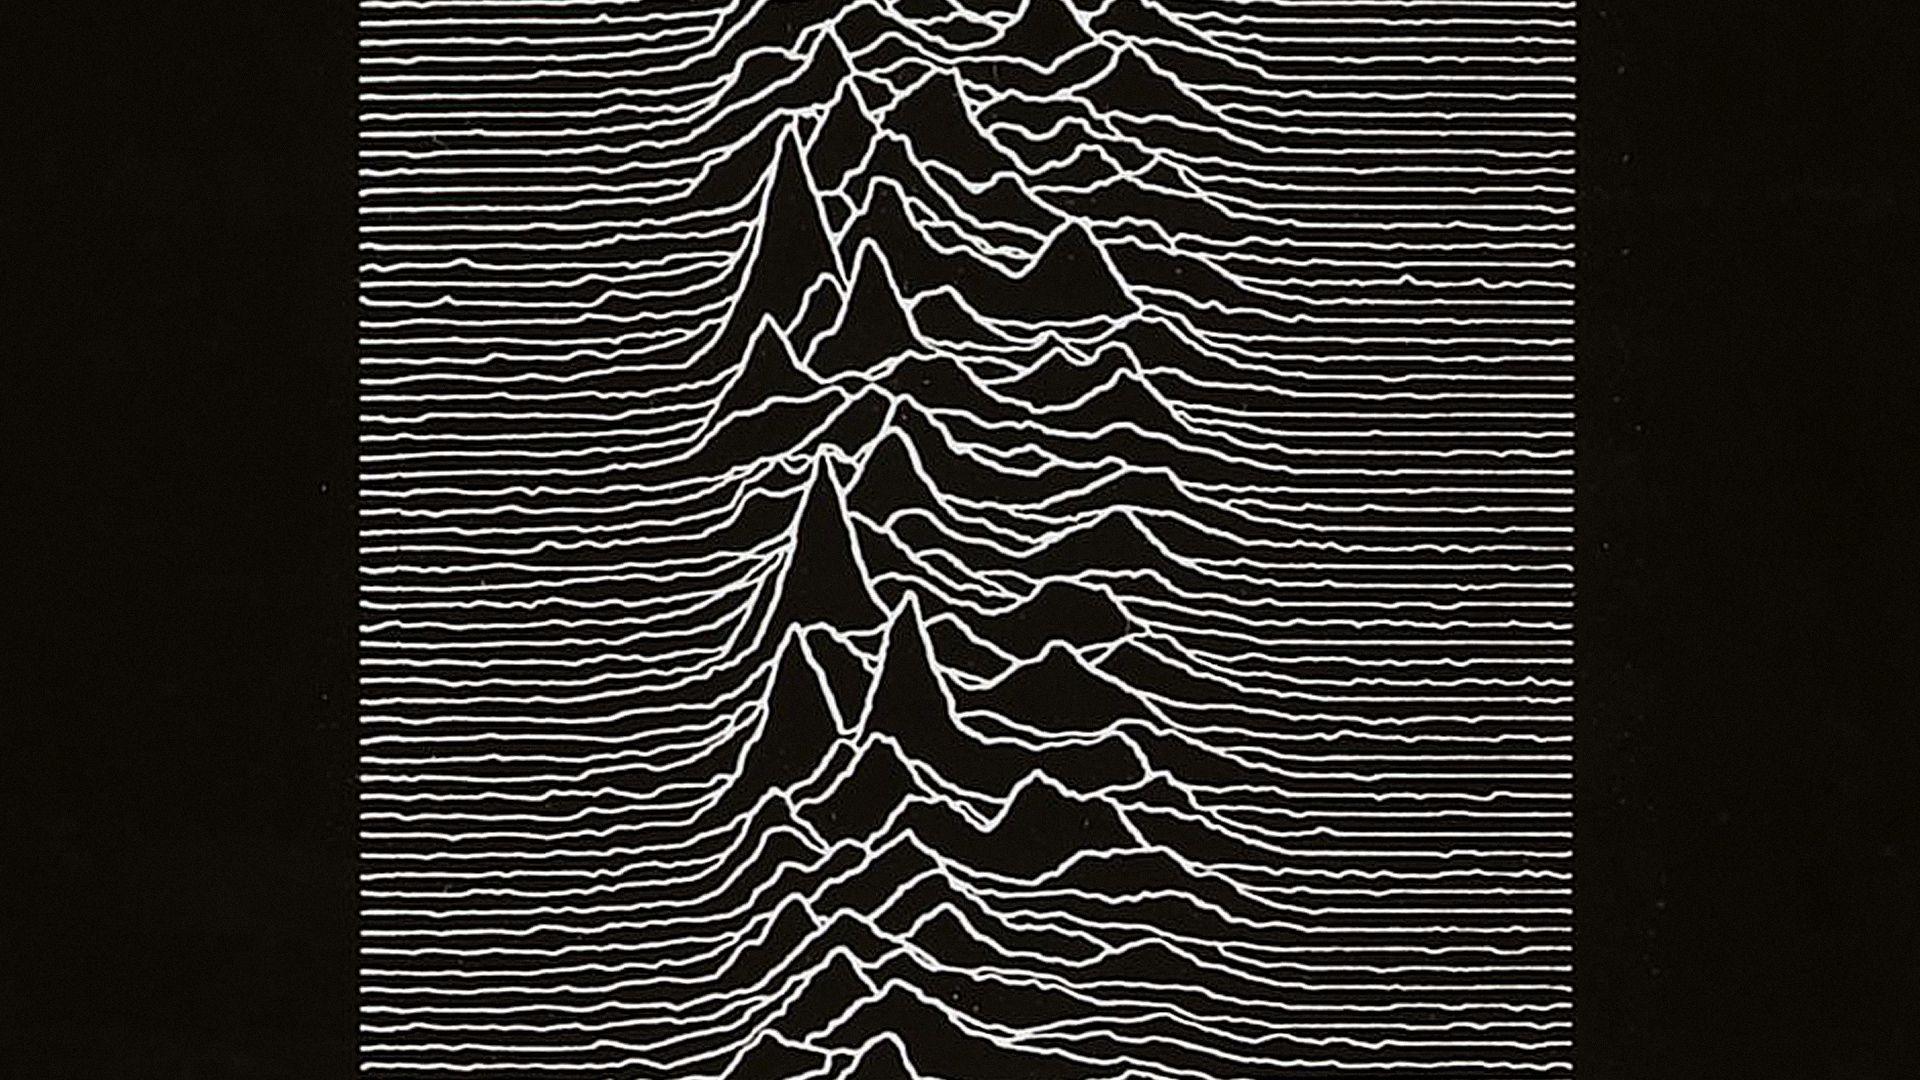 3042705 Poster P 1 Joy Divisions Iconic Unknown Pleasures Cover Was